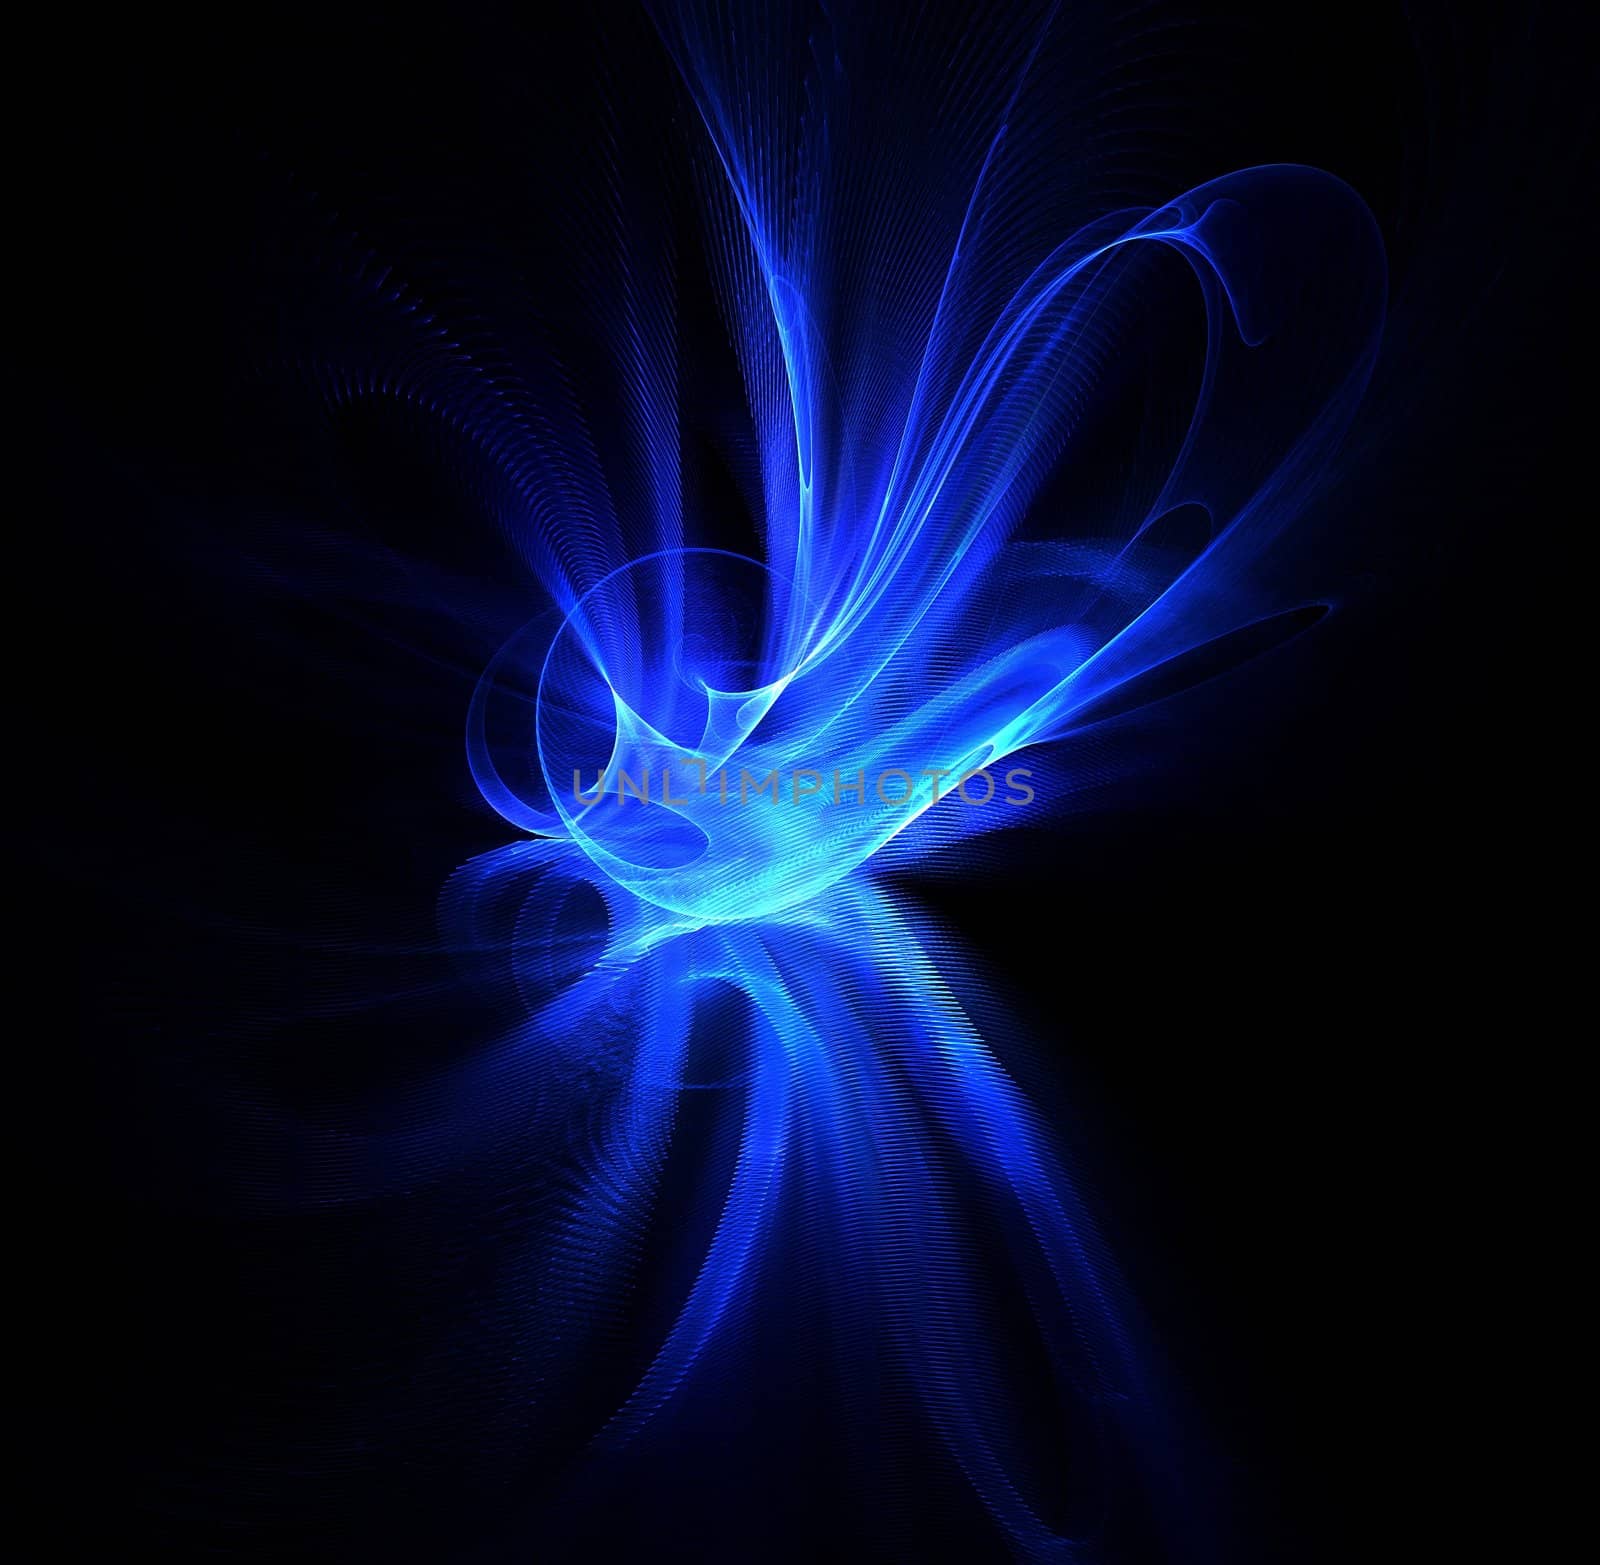 illustration of a abstract blue flame background 1